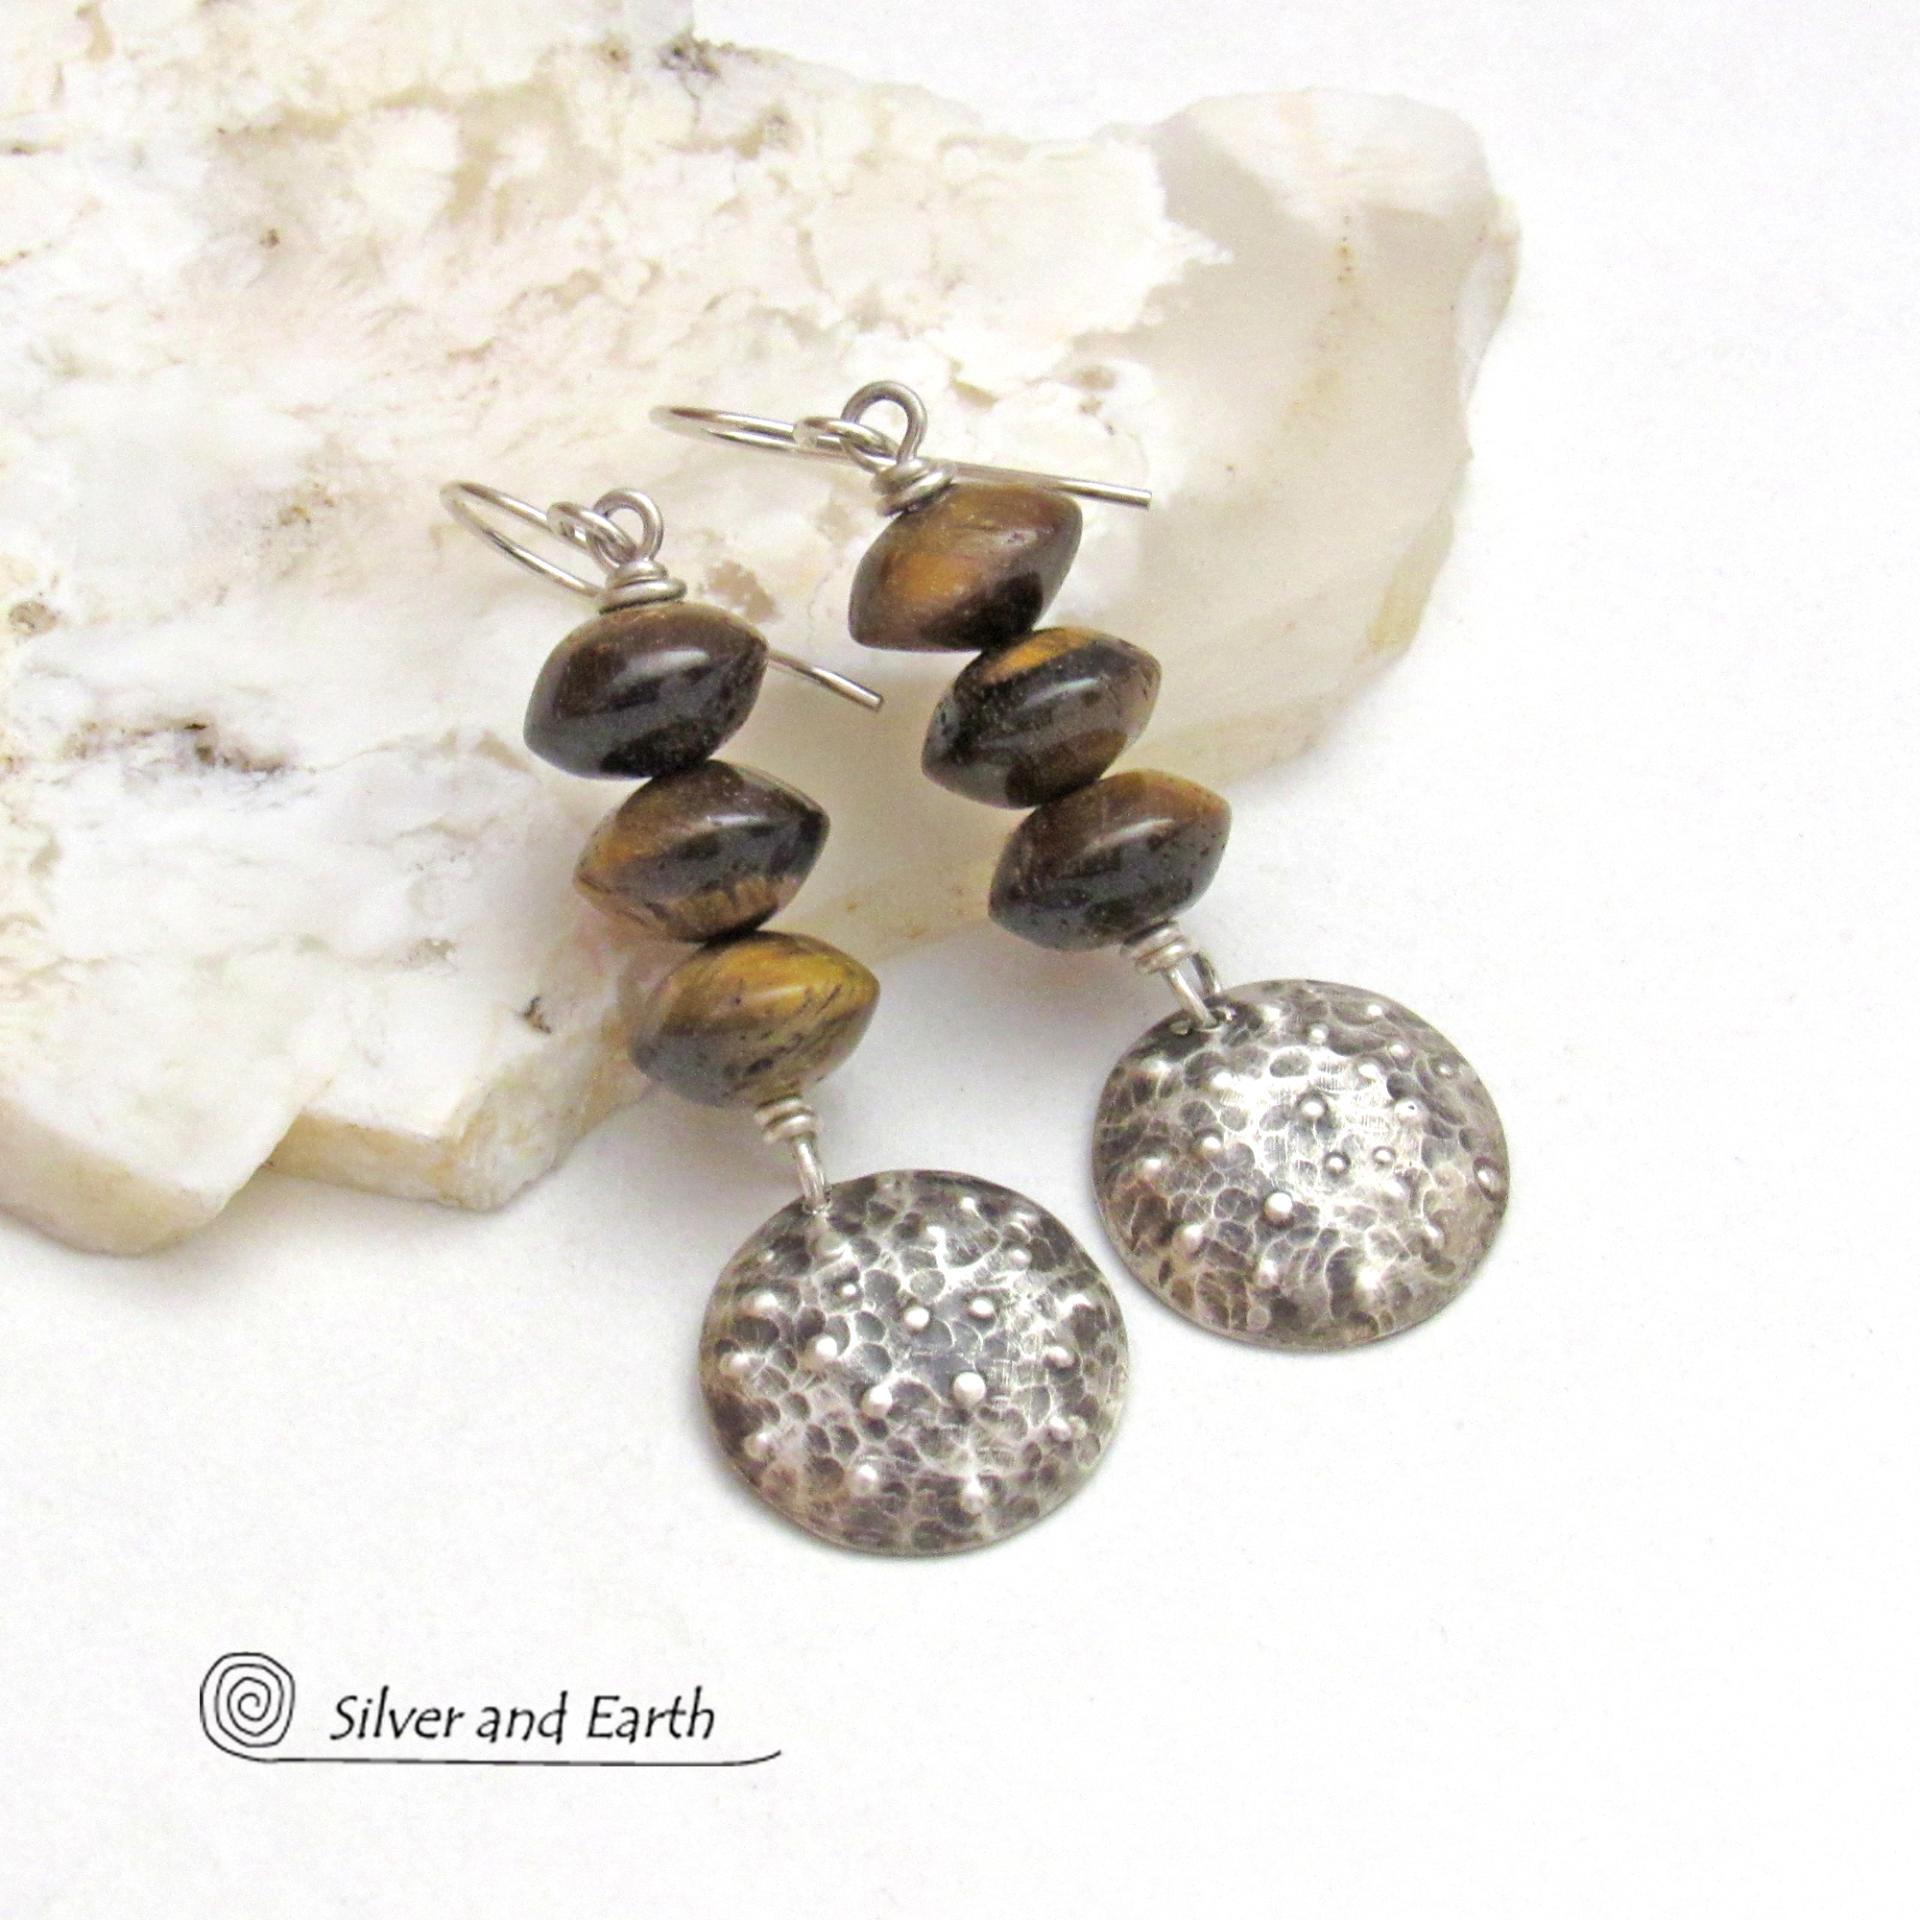 Small Sterling Silver Dangle Earrings with Brown Tiger's Eye Stones